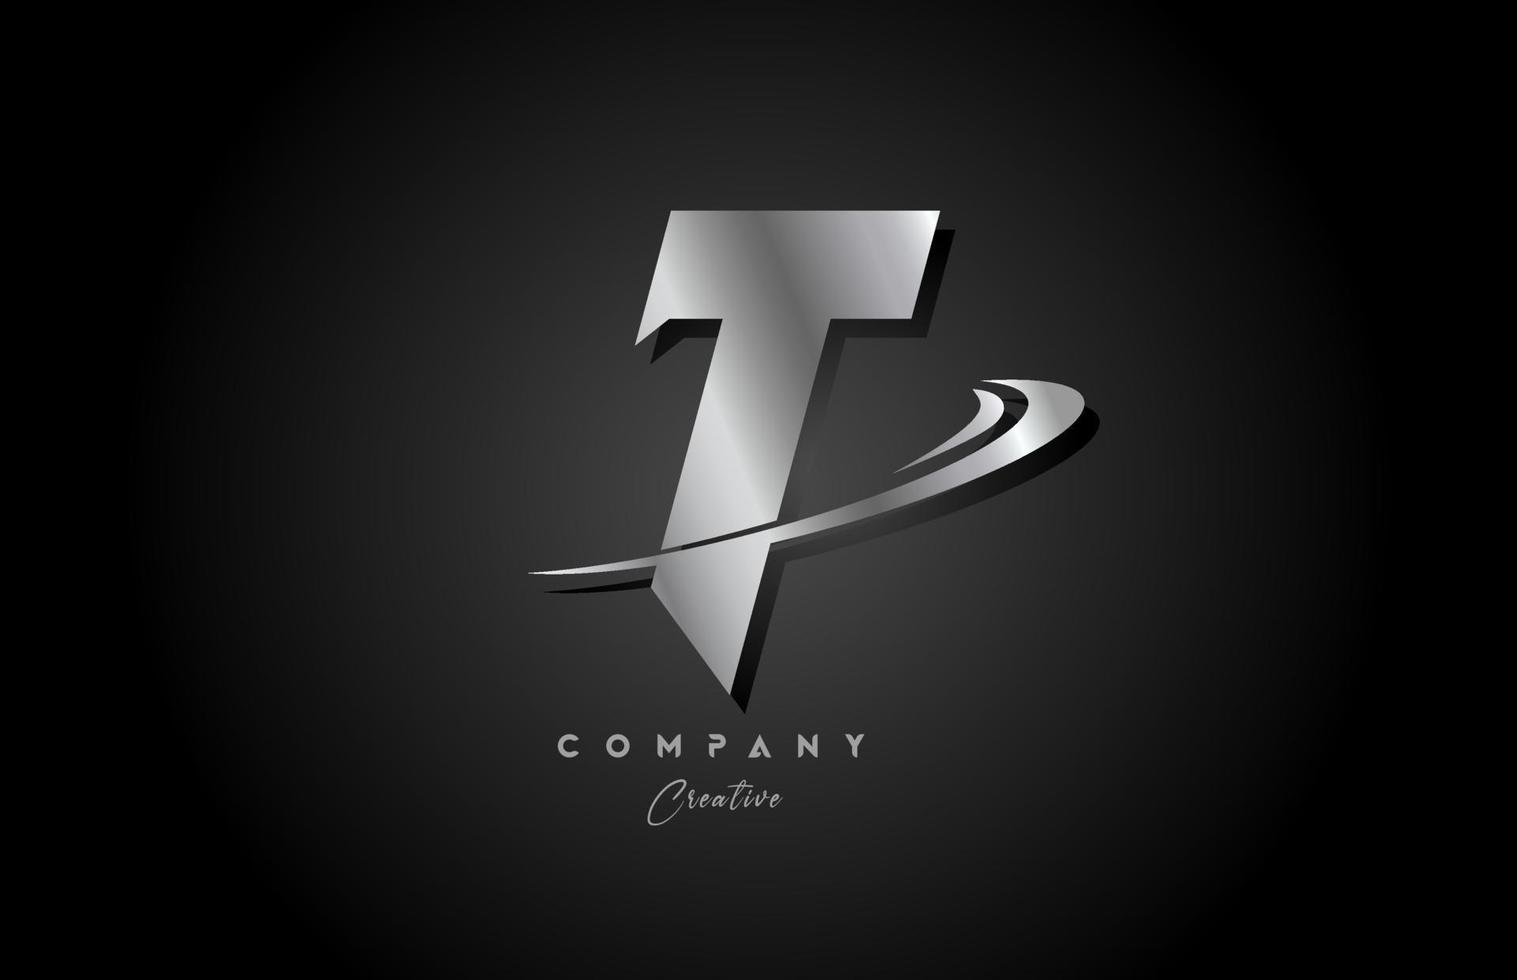 T silver metal grey alphabet letter logo icon design with swoosh. Creative template for company and business vector